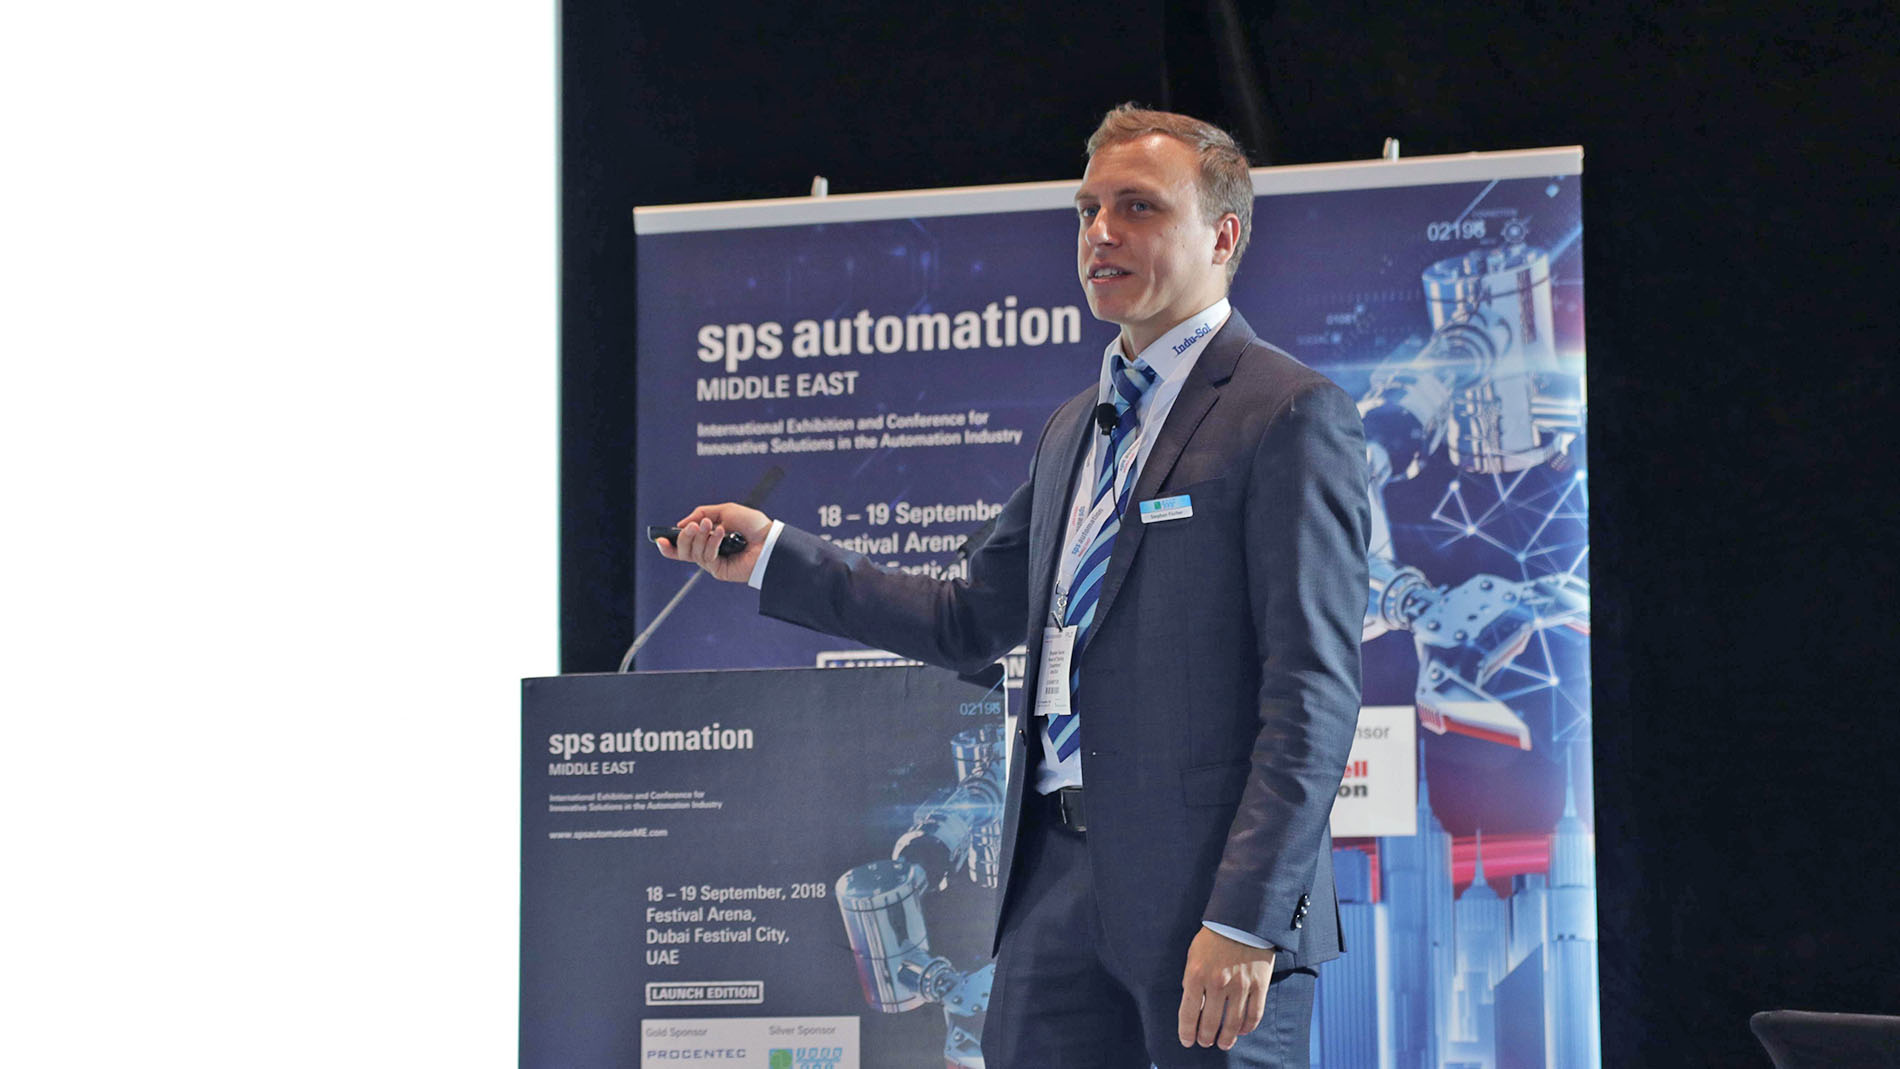 SPS Automation Middle East